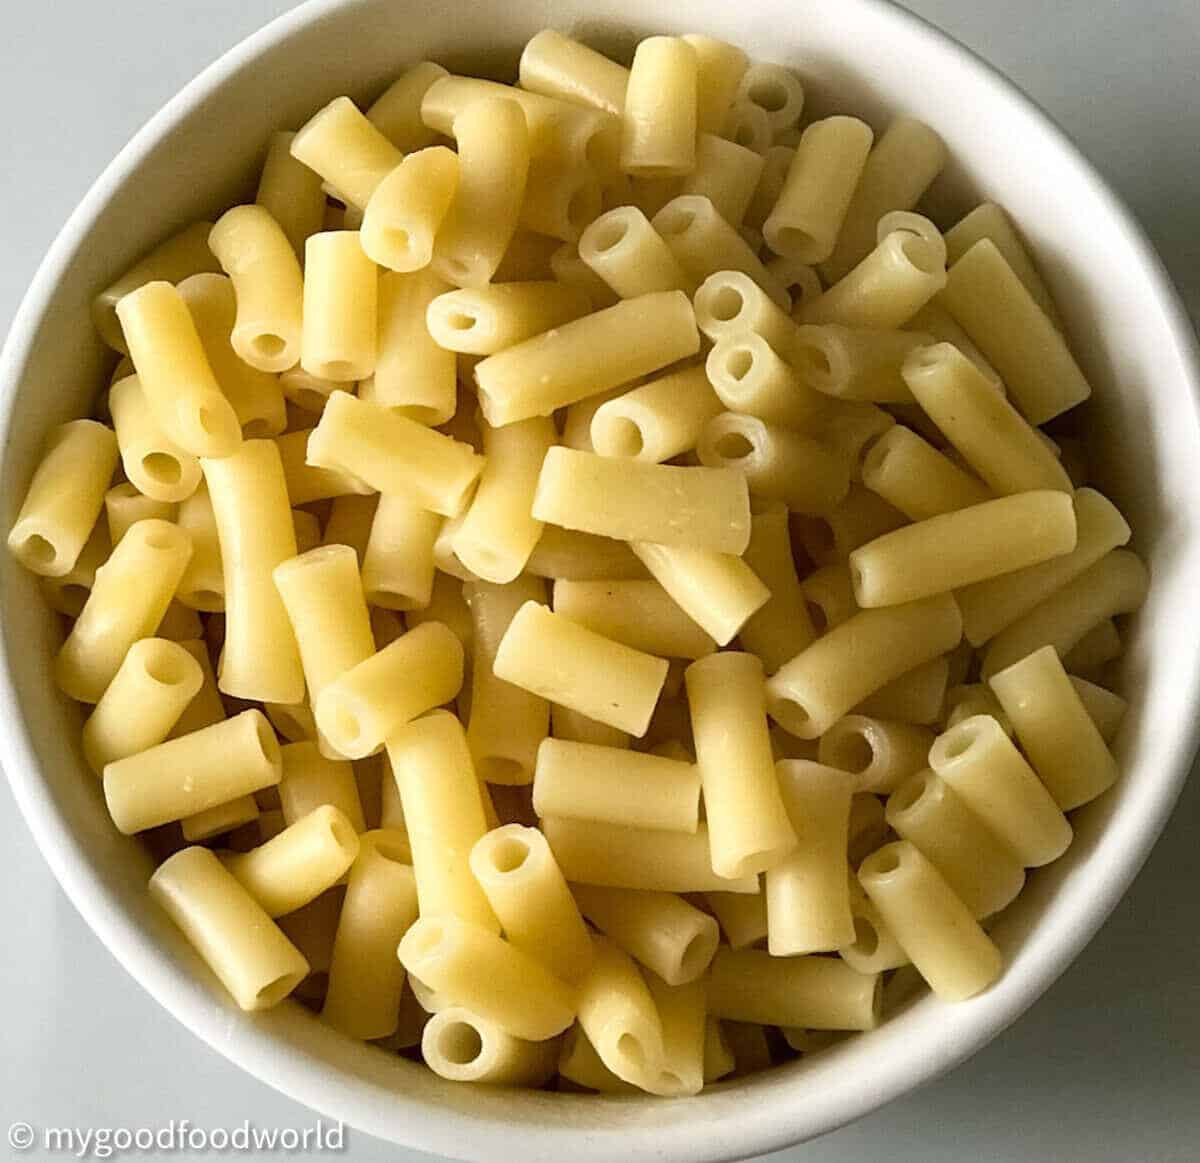 Boiled tube-shaped macaroni plced in a round shaped white bowl. The bowl is placed on a light colored background.